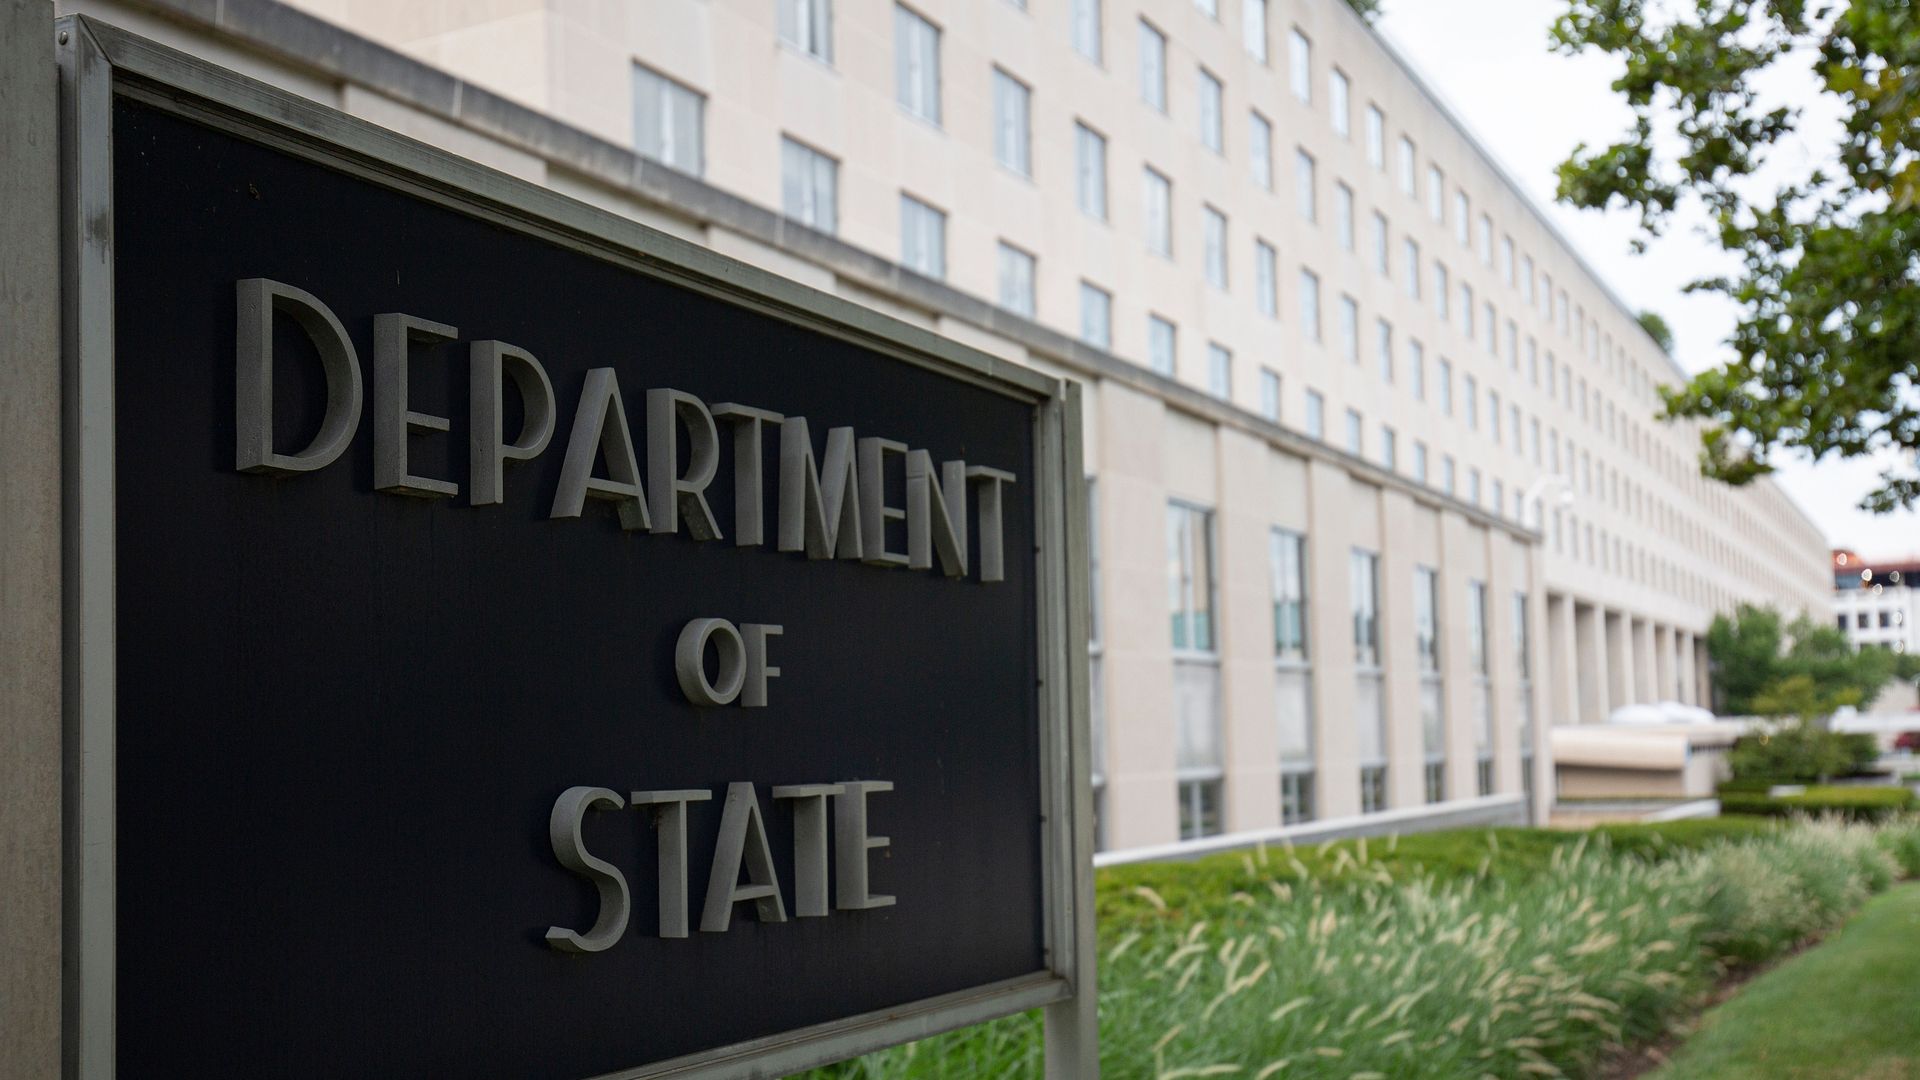  The US Department of State building is seen in Washington, DC, on July 22, 2019